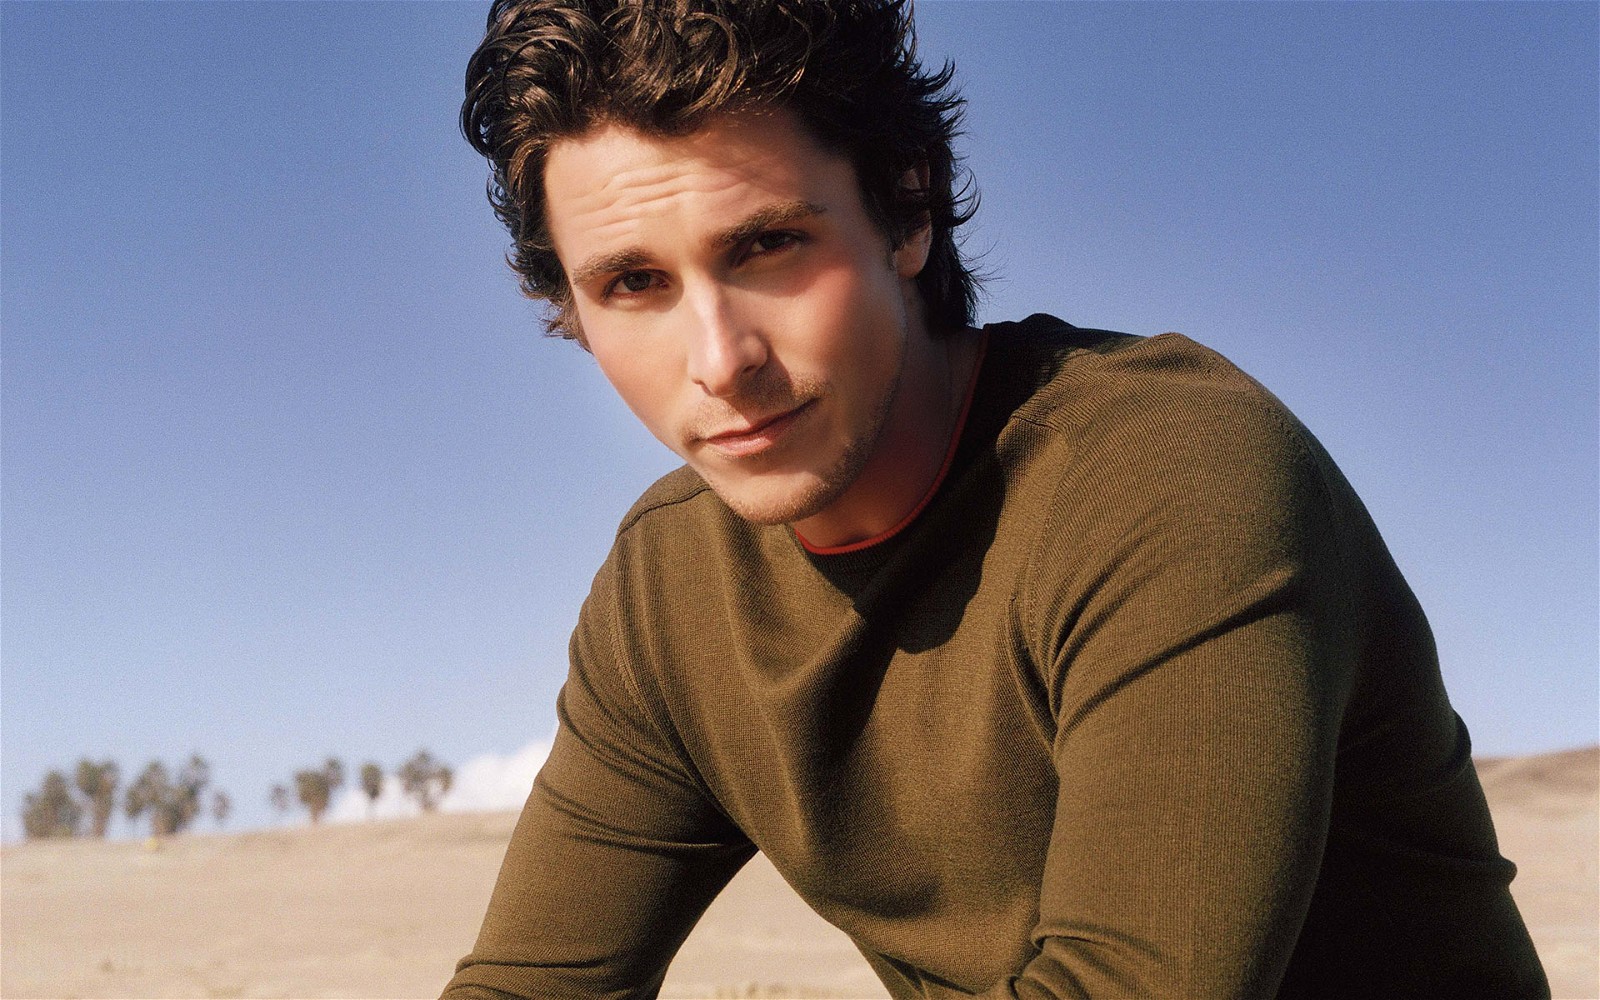 Young Christian Bale